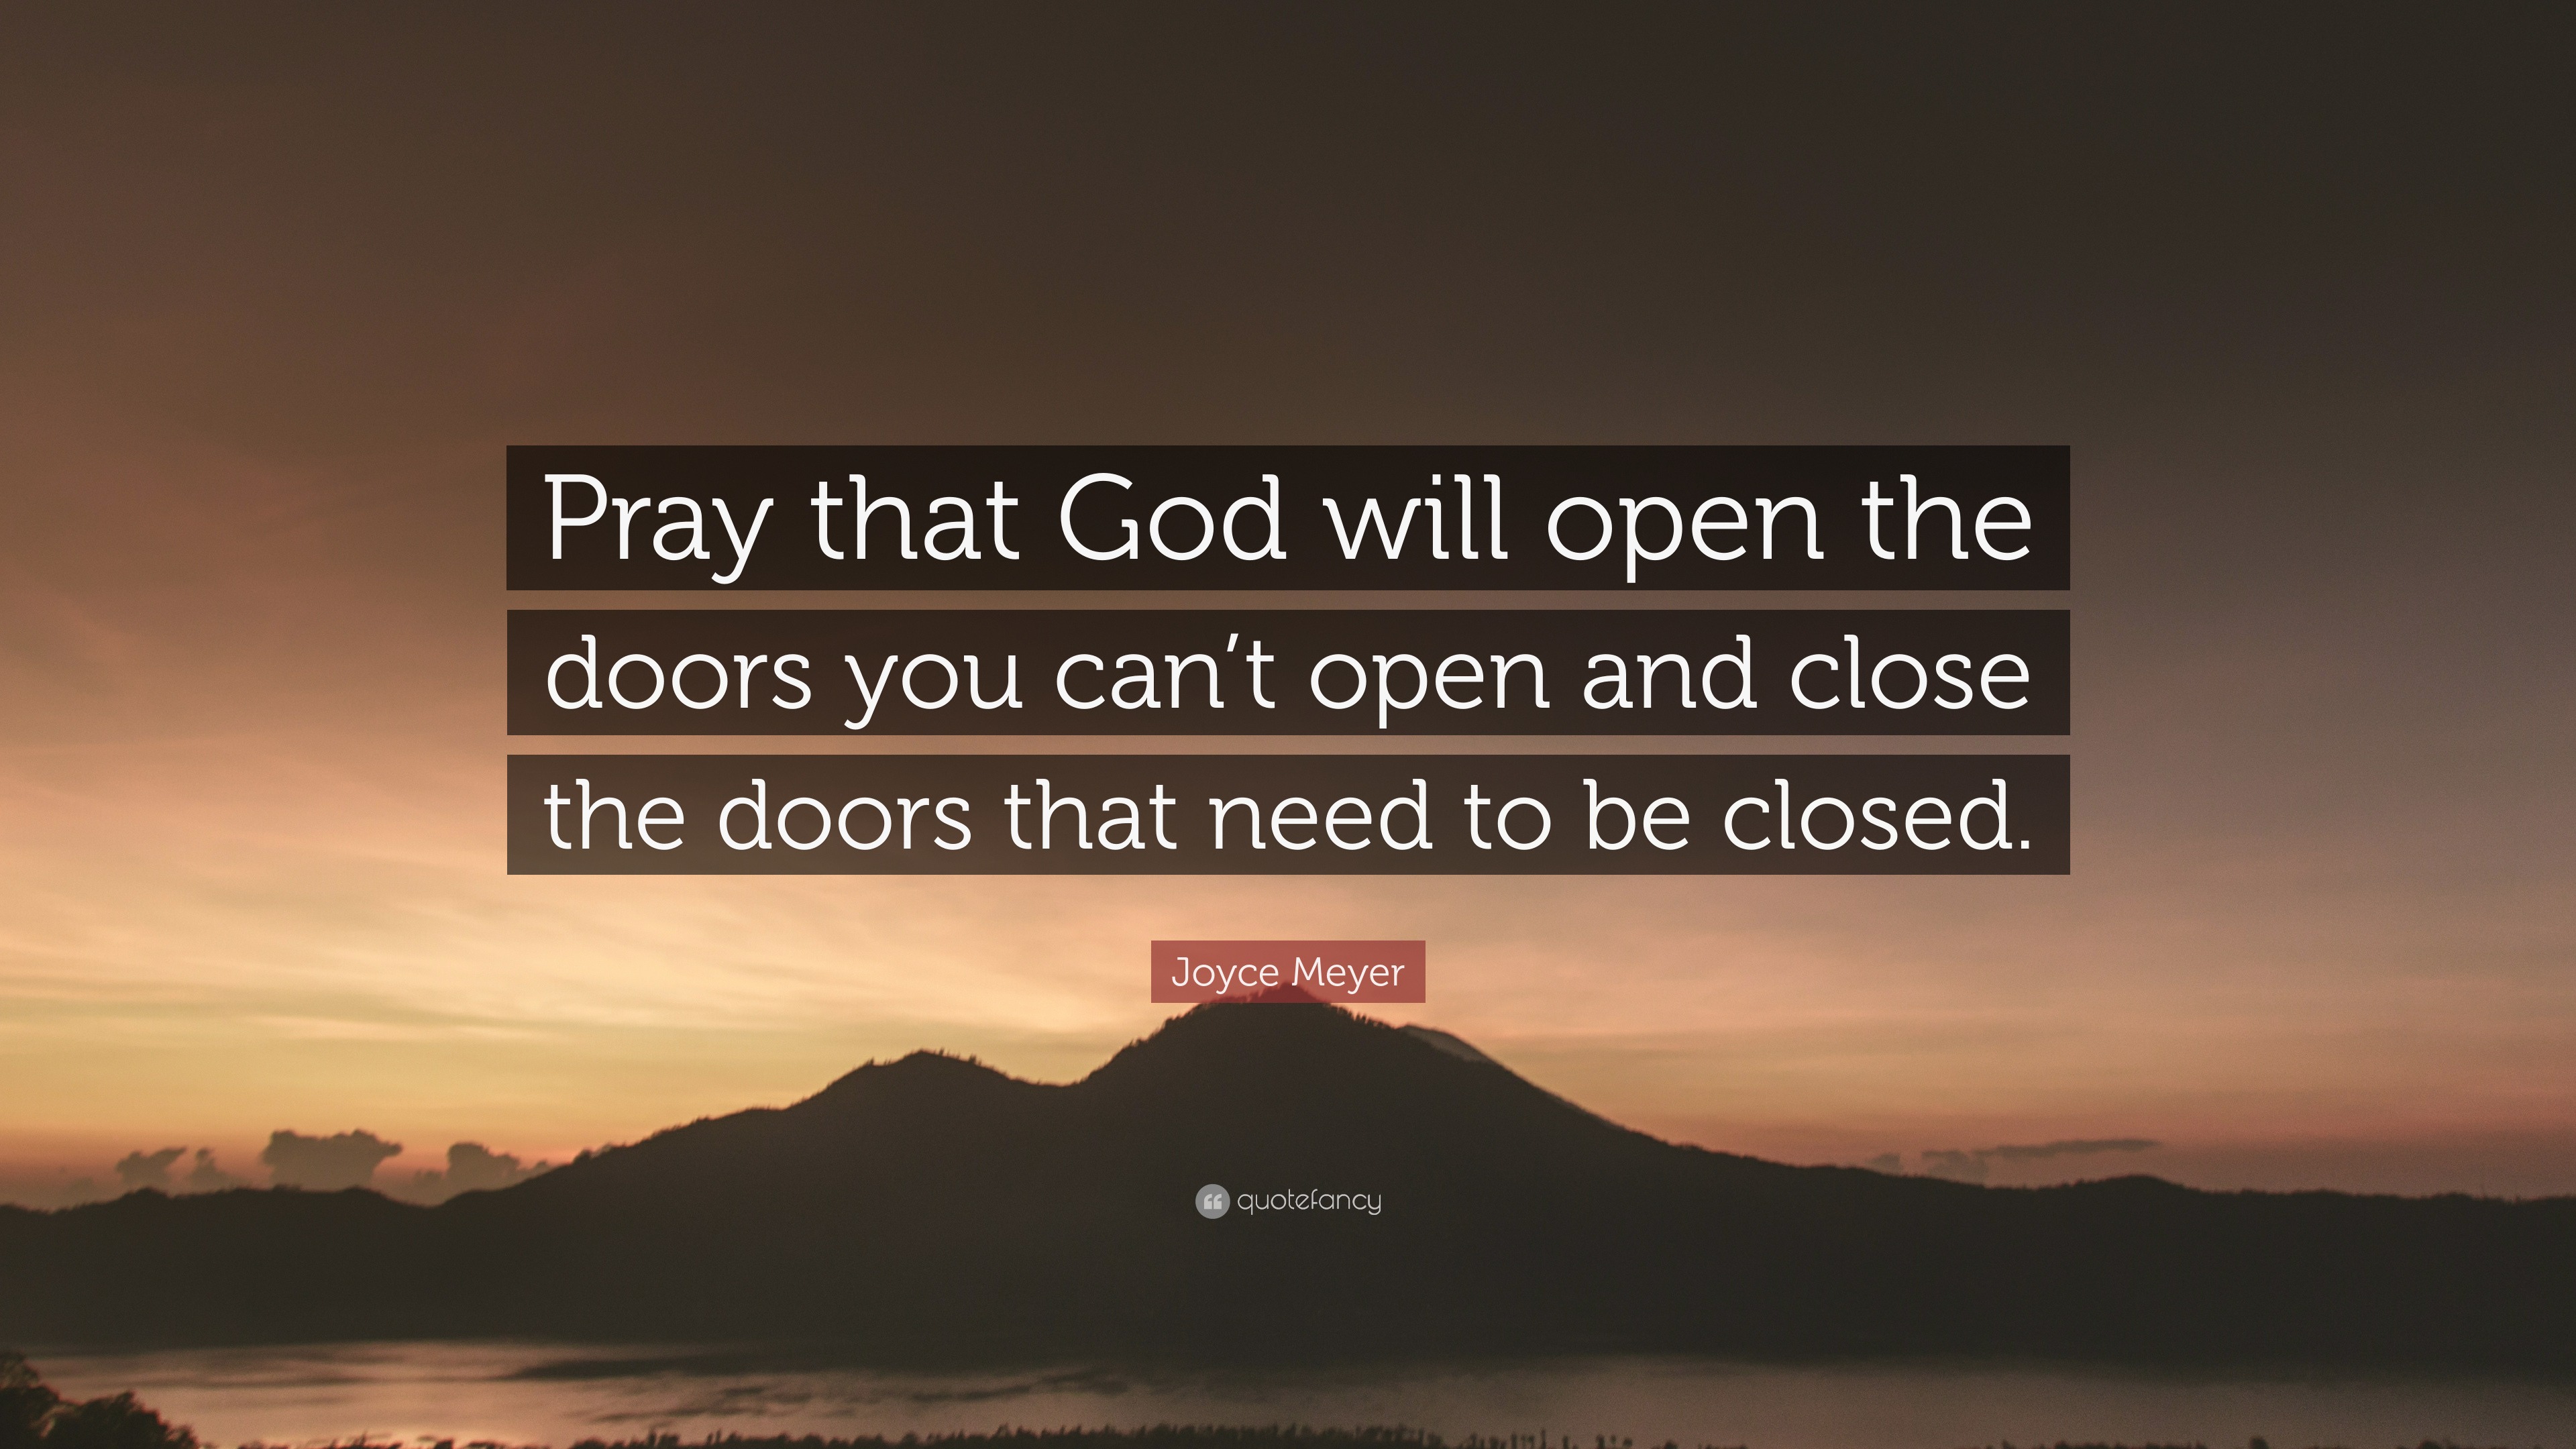 Joyce Meyer Quote: “Pray that God will open the doors you can’t open ...